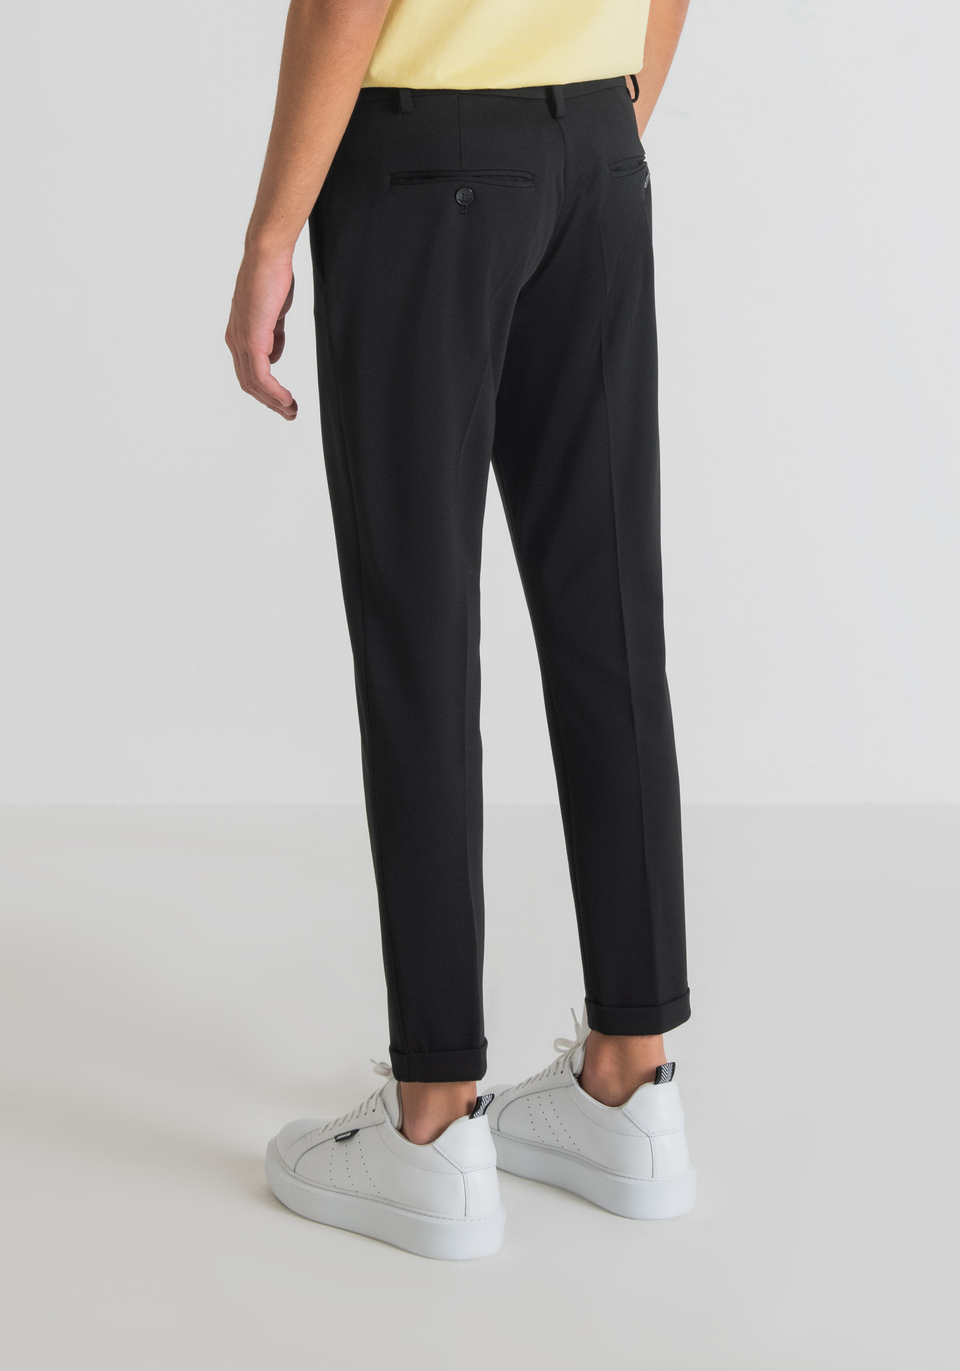 "ASHE" SUPER SKINNY FIT TROUSERS IN STRETCH VISCOSE BLEND - Antony Morato Online Shop